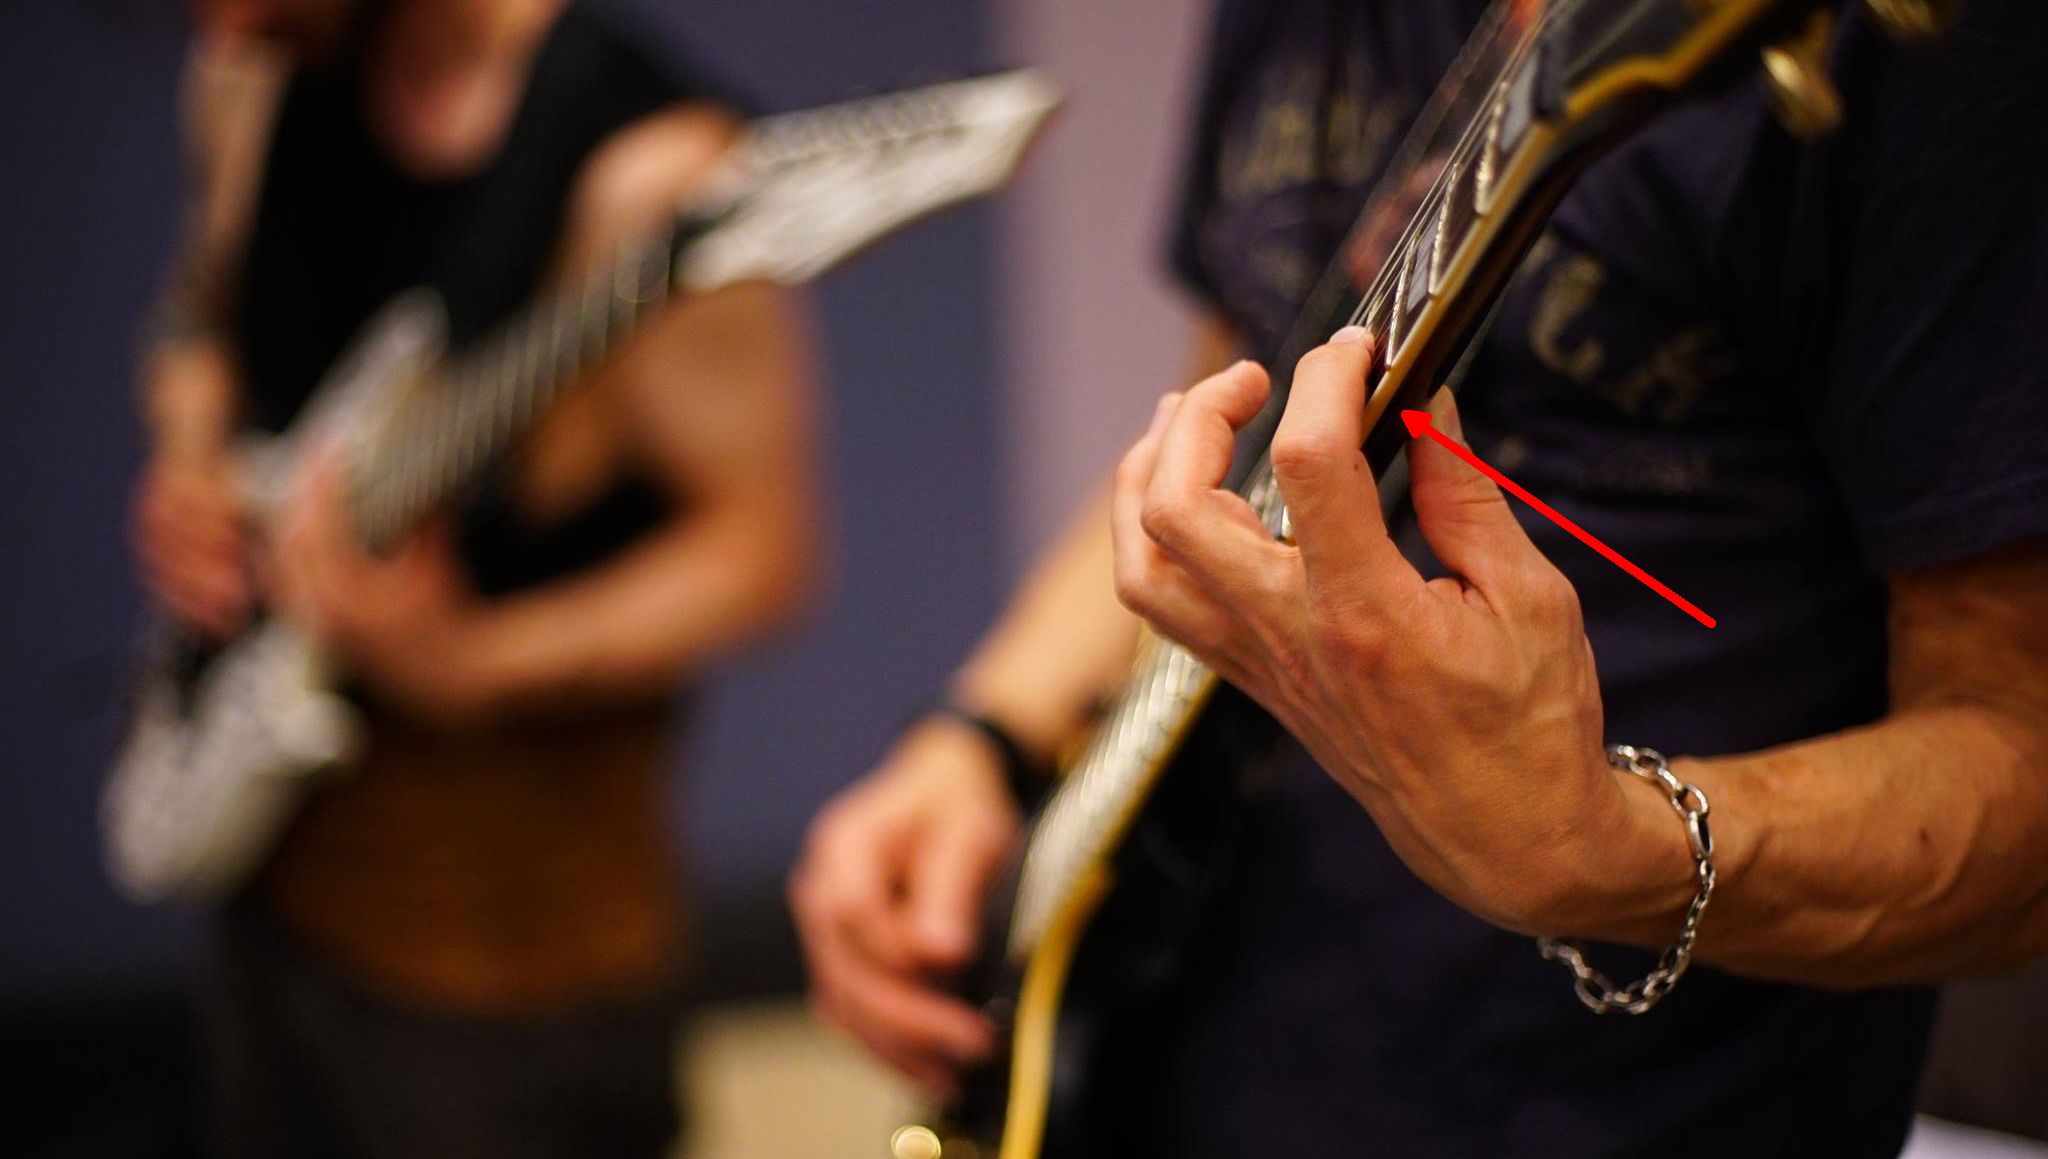 Get Tips For How To Play Guitar Faster Without Mistakes